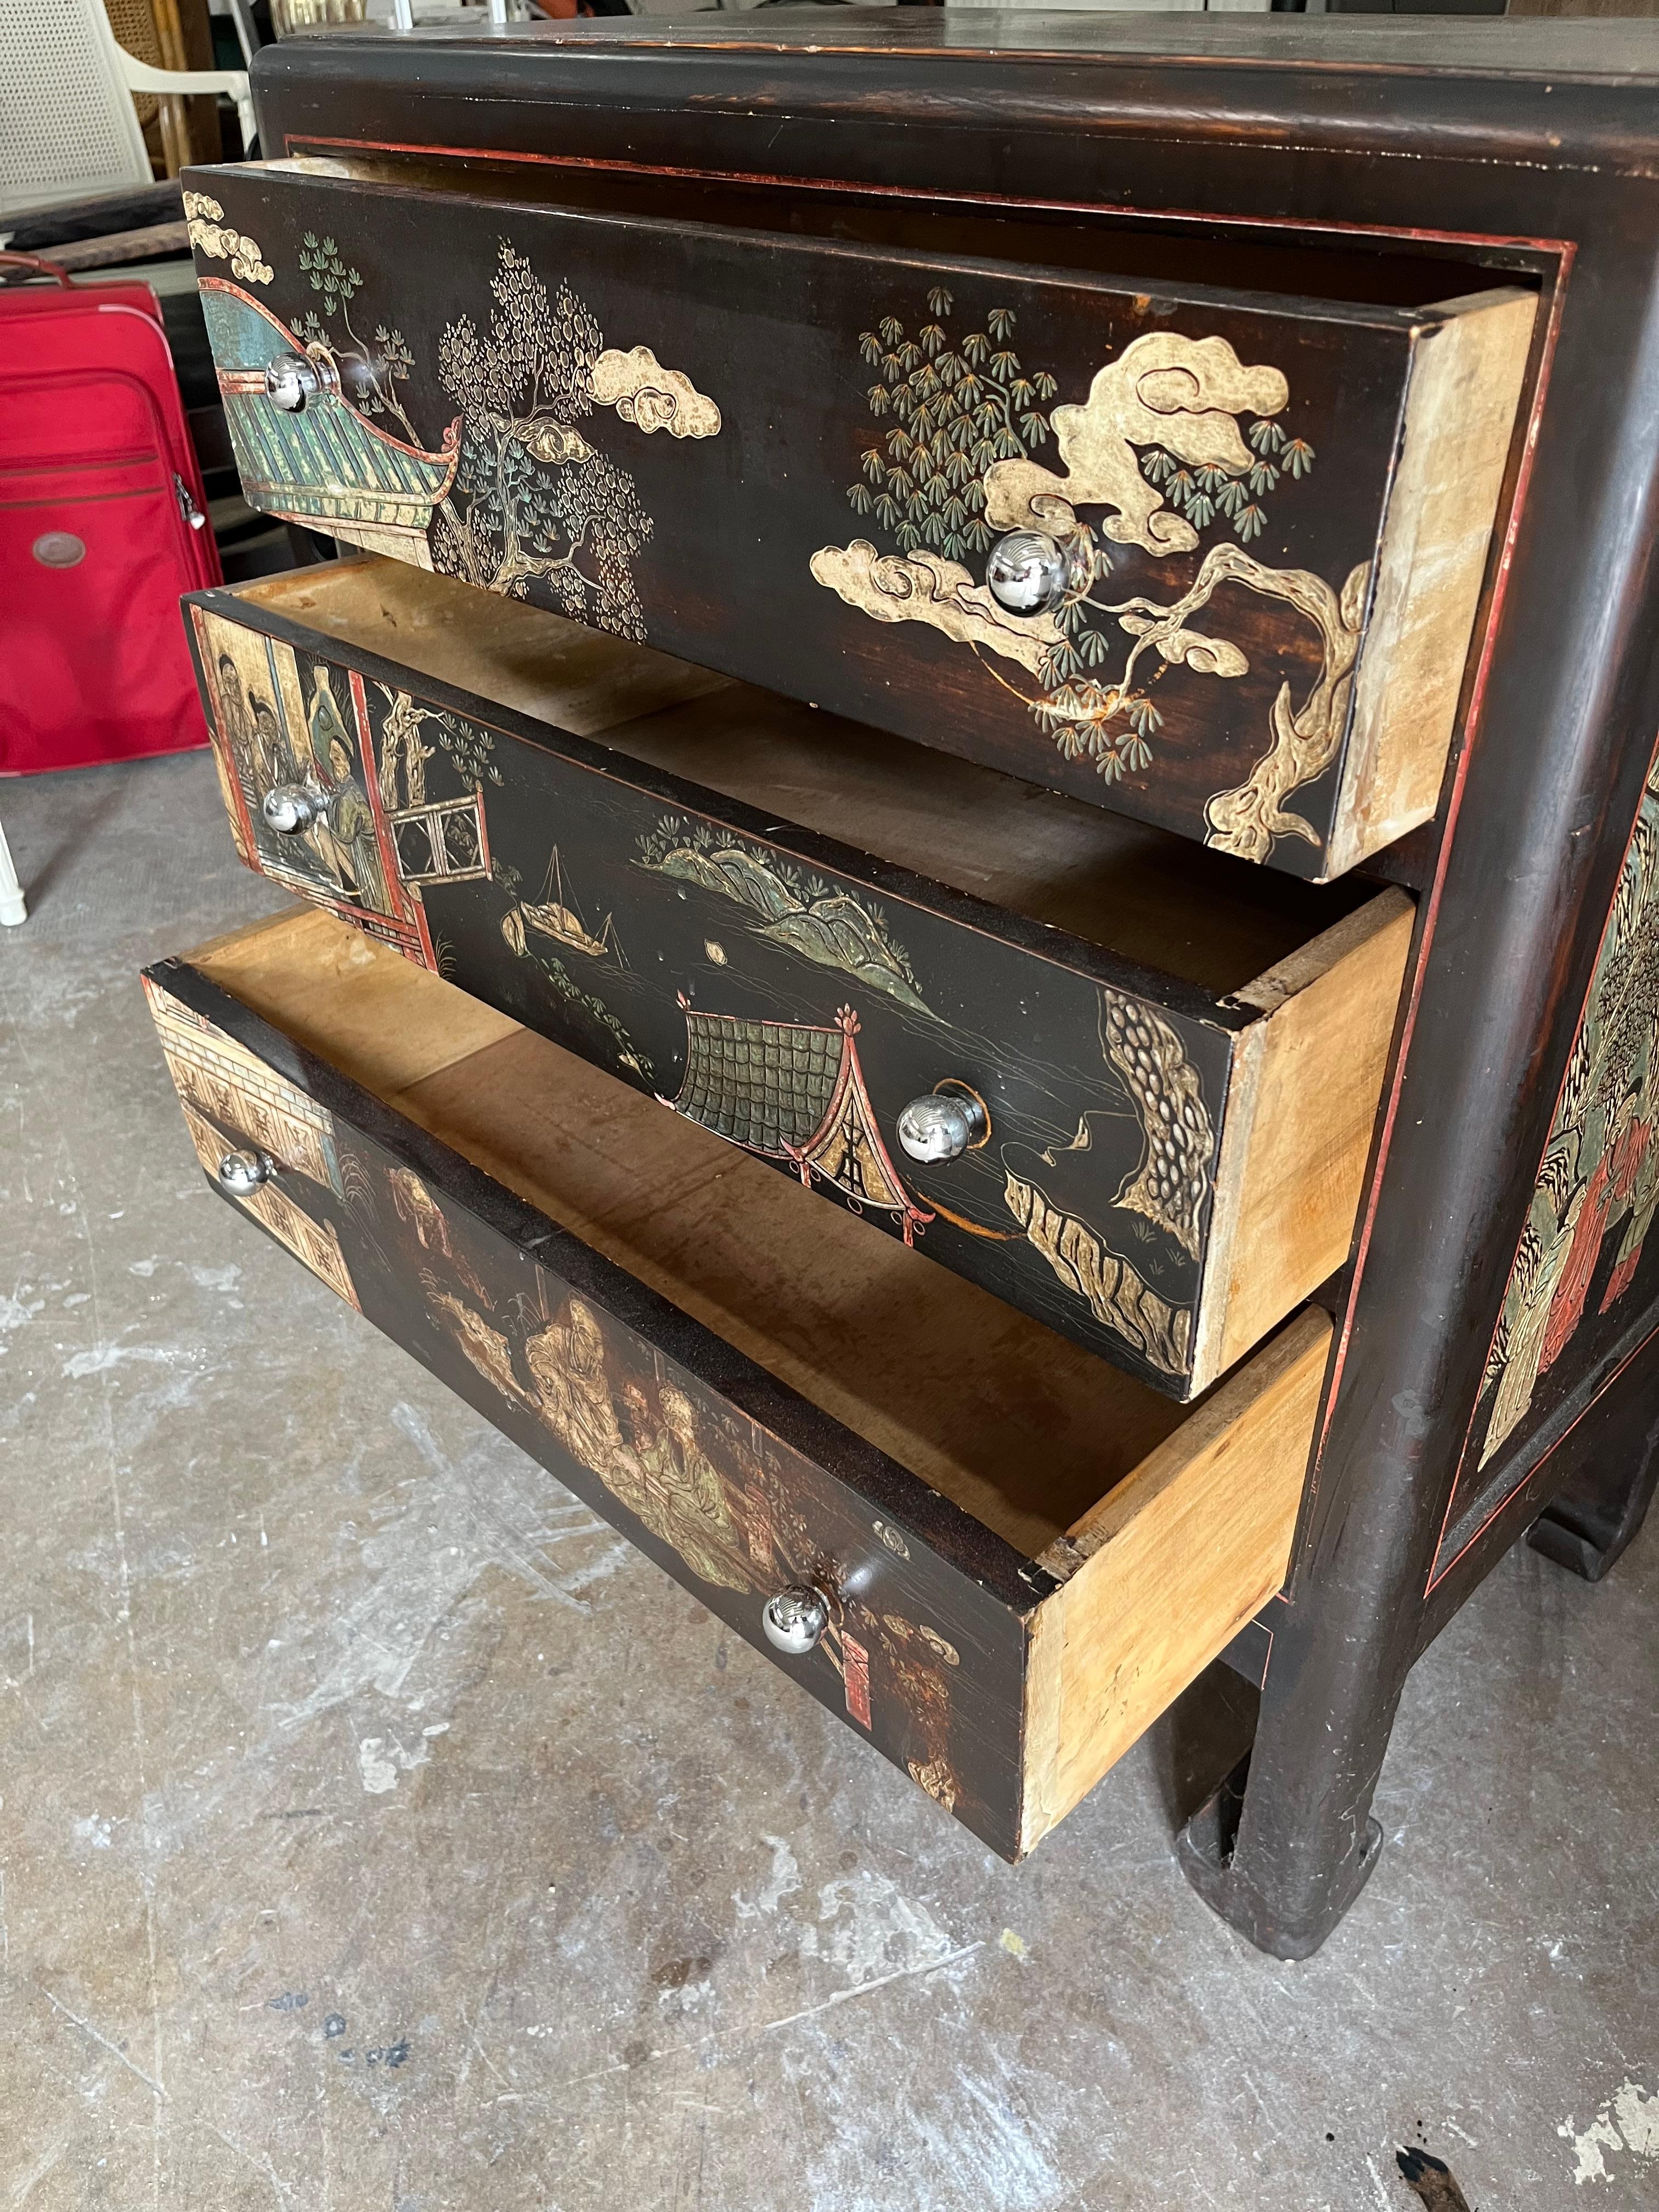 Small Chinese Chest of drawer, elegant piece can be a touch of oriental design in any room.
Three drawers decorated , representing a sea side landscape animated with Chinese characters 
circa 1920 for export.
The furniture is  decorated with Chinese